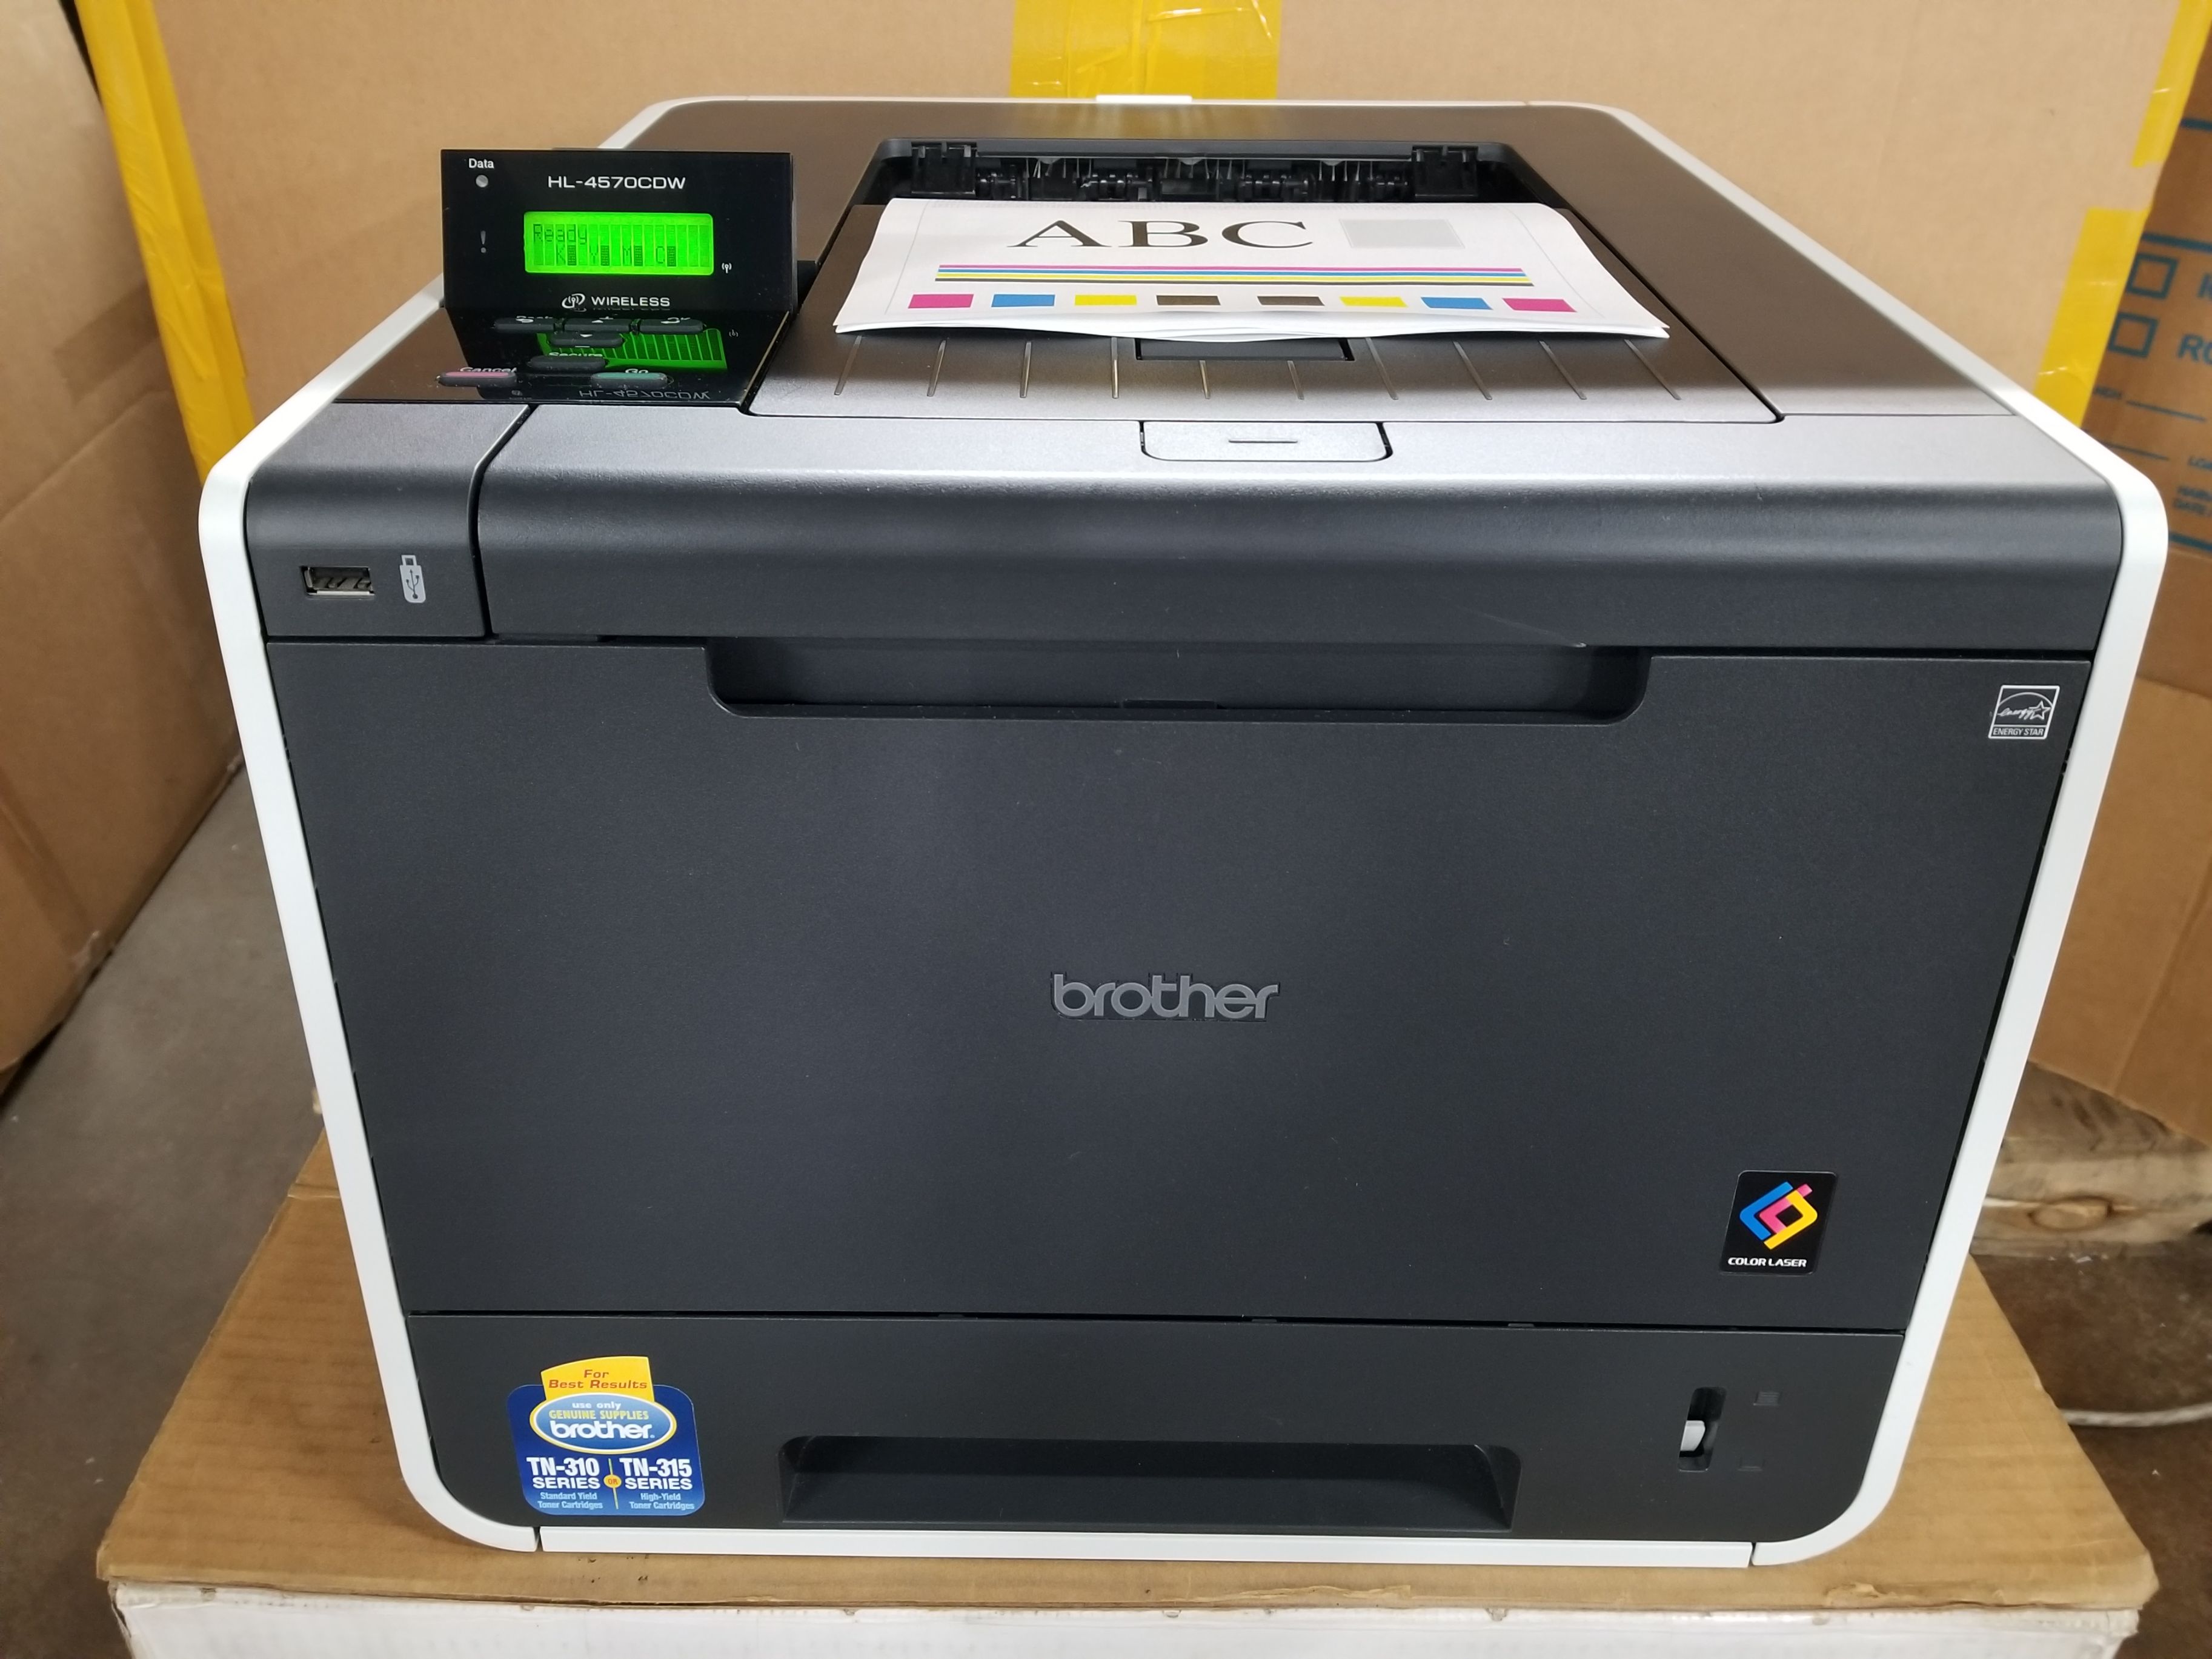 en milliard Intervenere Calamity Brother HL-4570CDW Wireless Color Laser Printer Expertly Serviced with  Toners. . inStock901.com - Technology Superstore of BPAI LLC